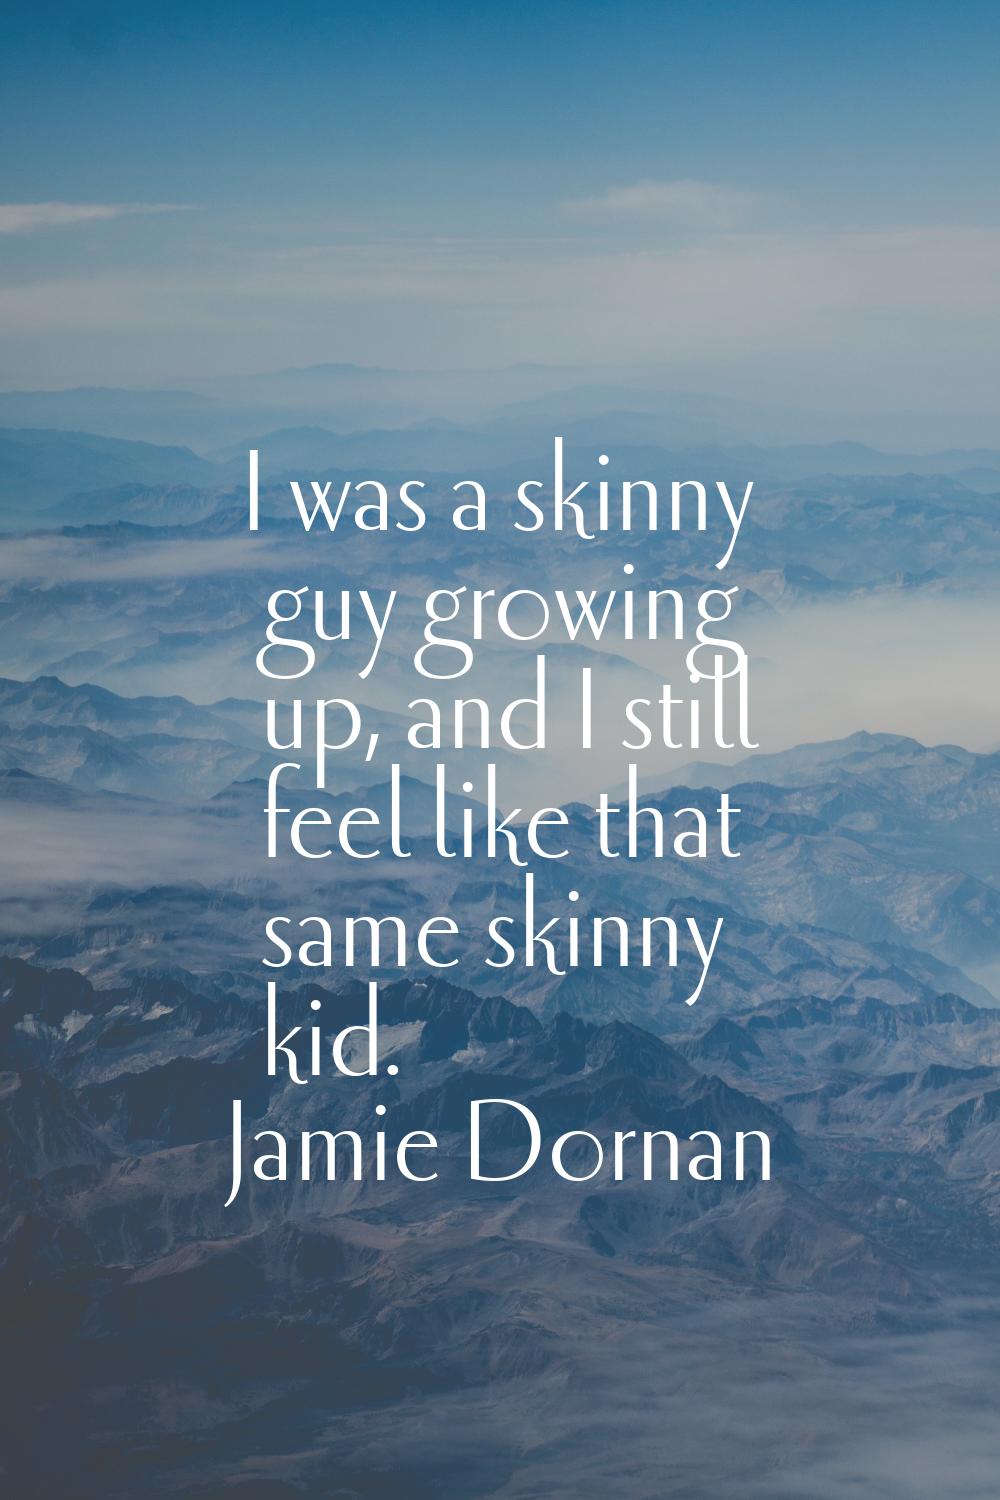 I was a skinny guy growing up, and I still feel like that same skinny kid.